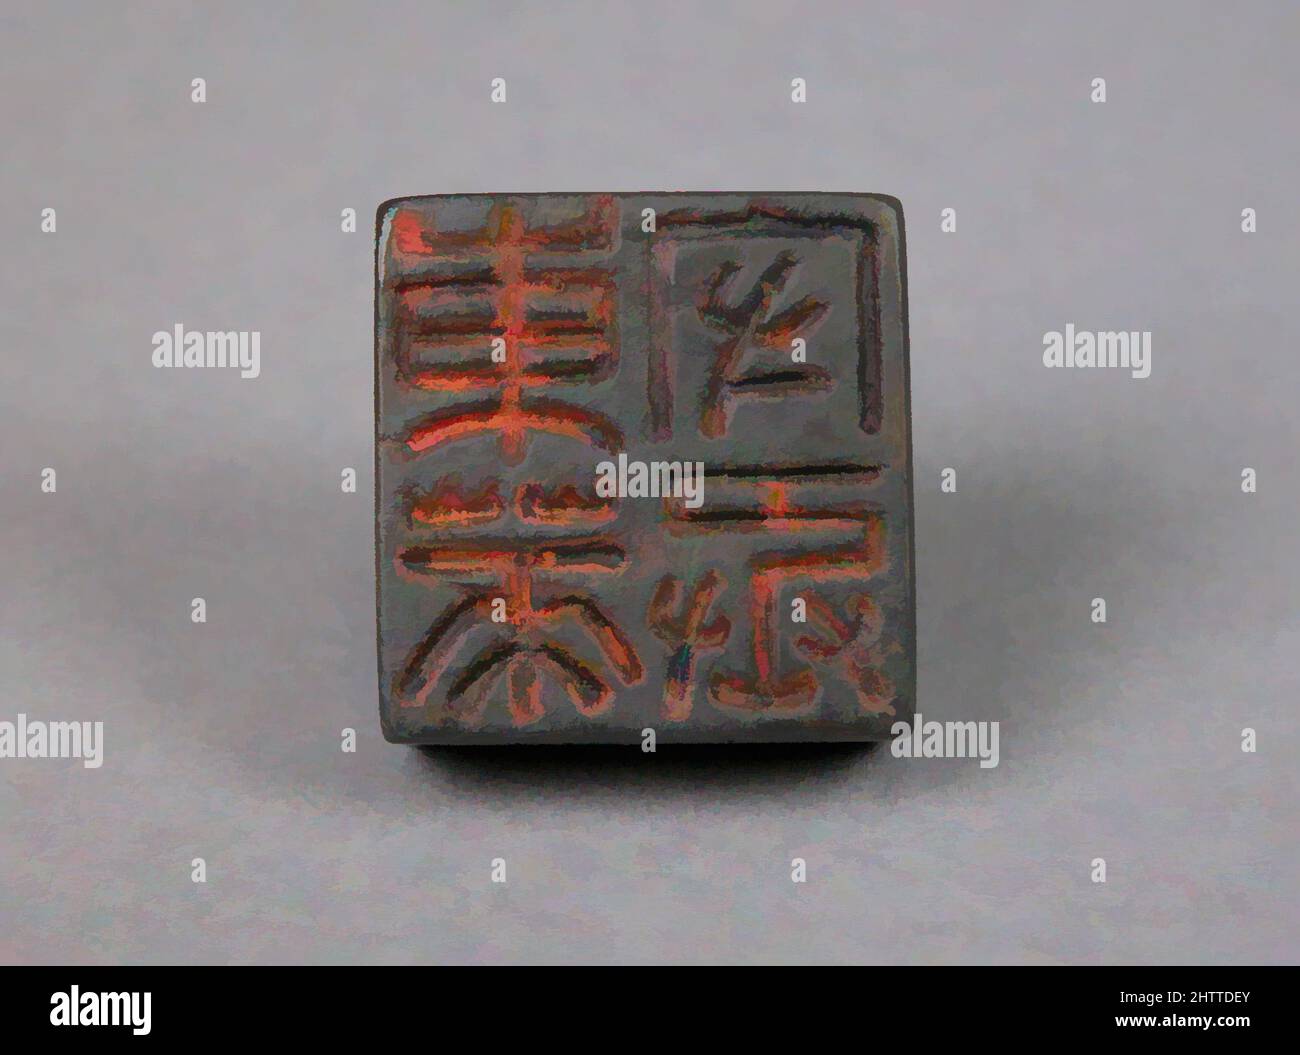 Art inspired by 東萊守丞, Seal, Ming dynasty (1368–1644) or earlier, China, Bronze, H. 15/16 in. (2.4 cm); W. 15/16 in. (2.4 cm); D. 13/16 in. (2.1 cm), Metalwork, Classic works modernized by Artotop with a splash of modernity. Shapes, color and value, eye-catching visual impact on art. Emotions through freedom of artworks in a contemporary way. A timeless message pursuing a wildly creative new direction. Artists turning to the digital medium and creating the Artotop NFT Stock Photo